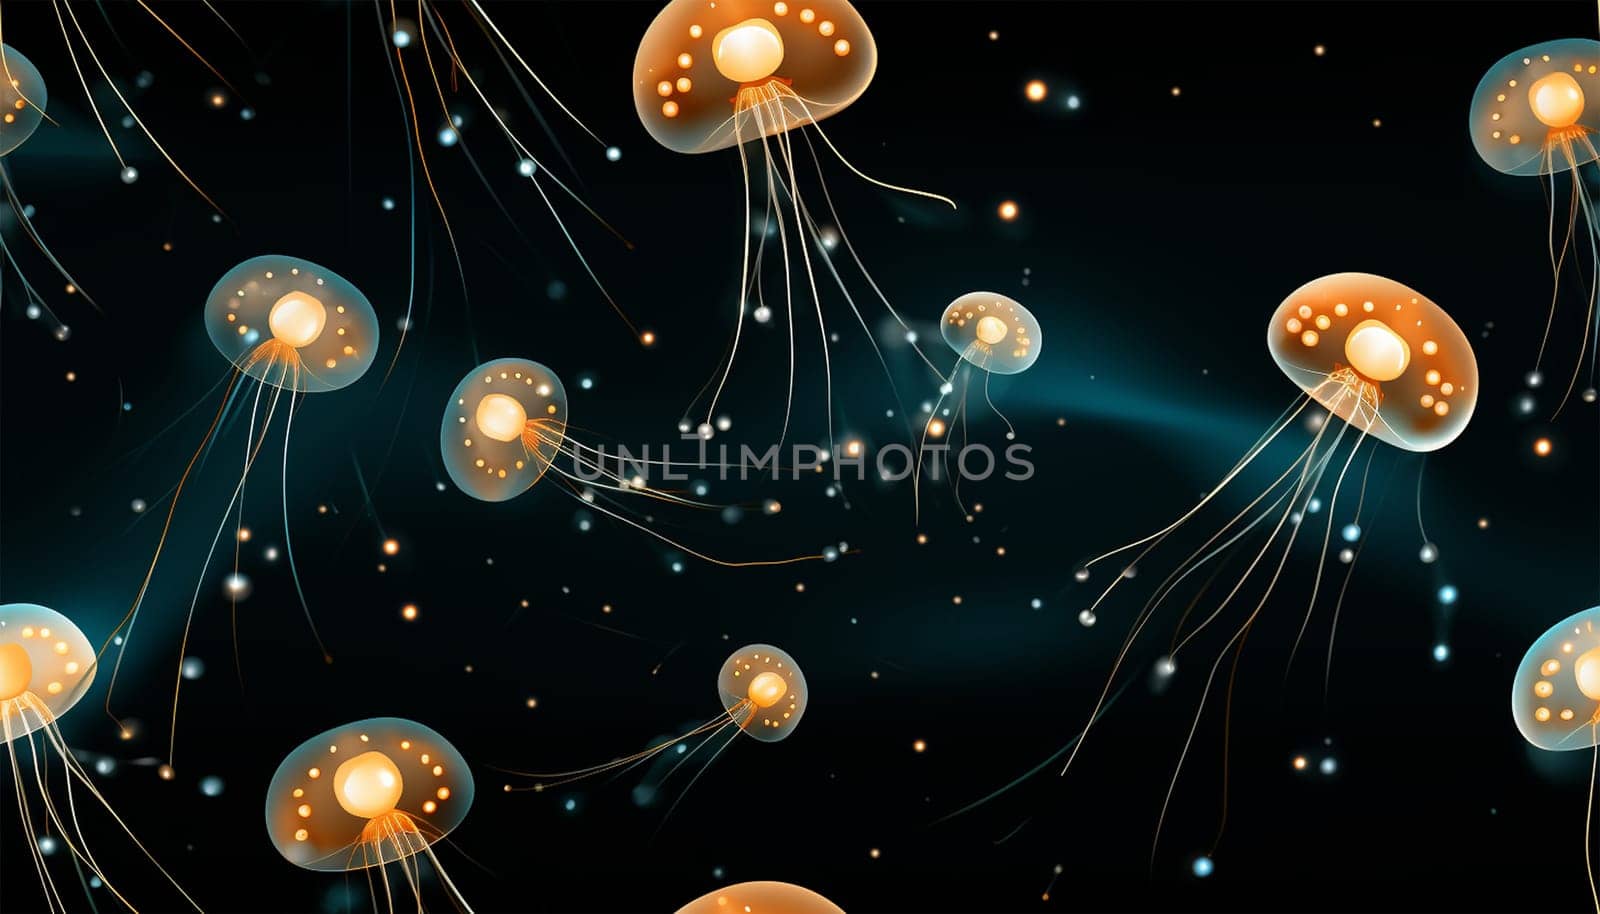 Jellyfish seamless pattern. Dark luxury art background with hand drawn jellyfish in gold art line style. Minimalistic banner with marine life for decoration, wallpaper, print, textile, interior design, packaging by Annebel146